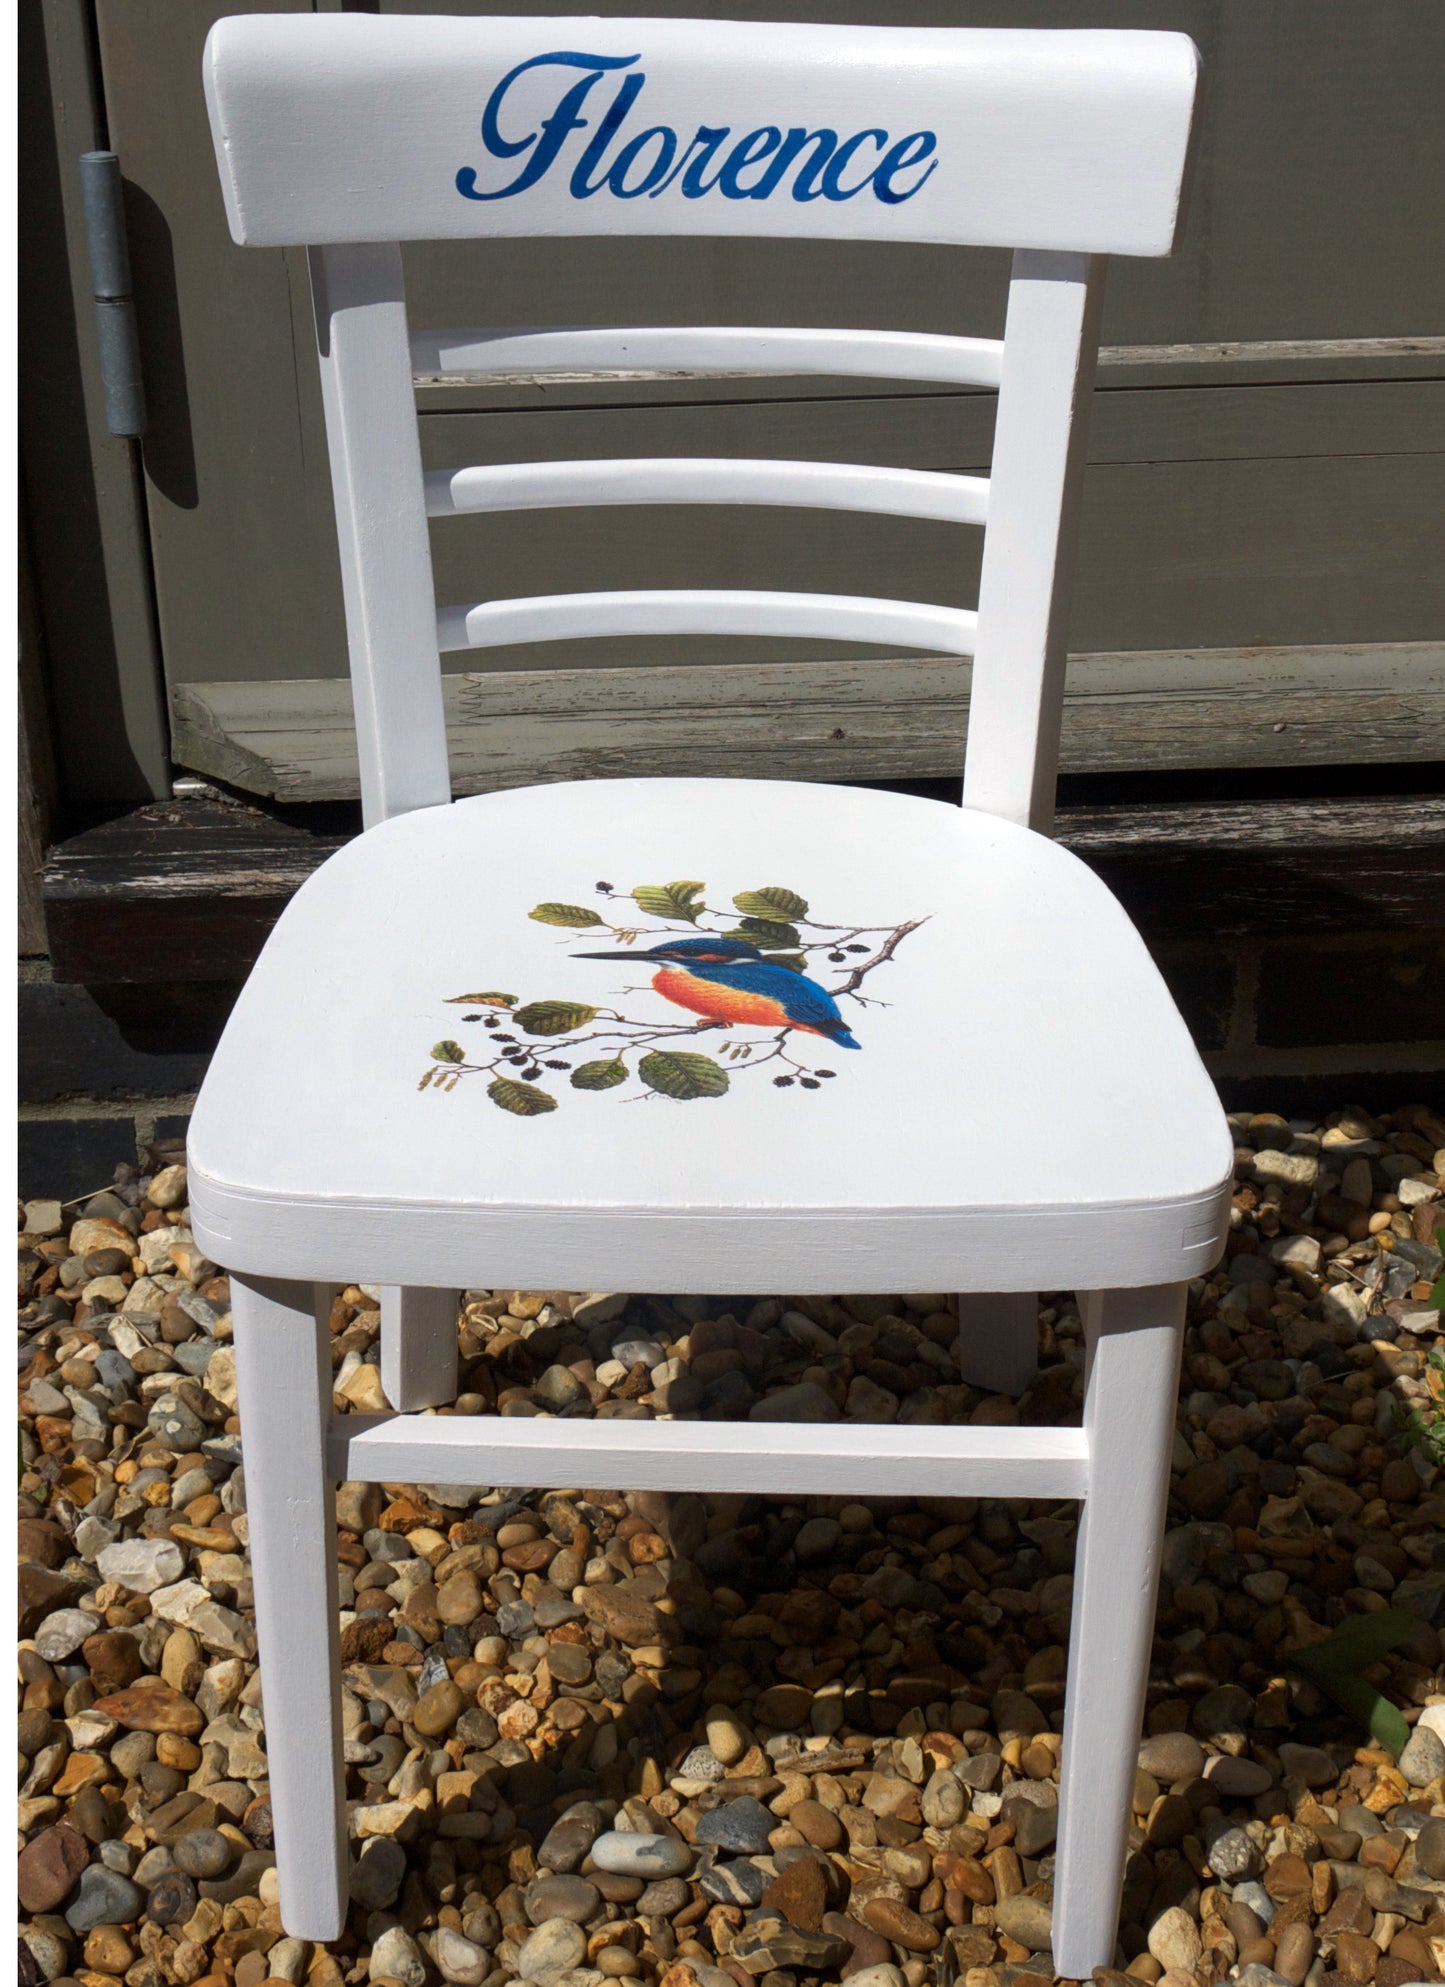 Children's personalised upcycled wooden nursery school chair with vintage bird theme and your child's name